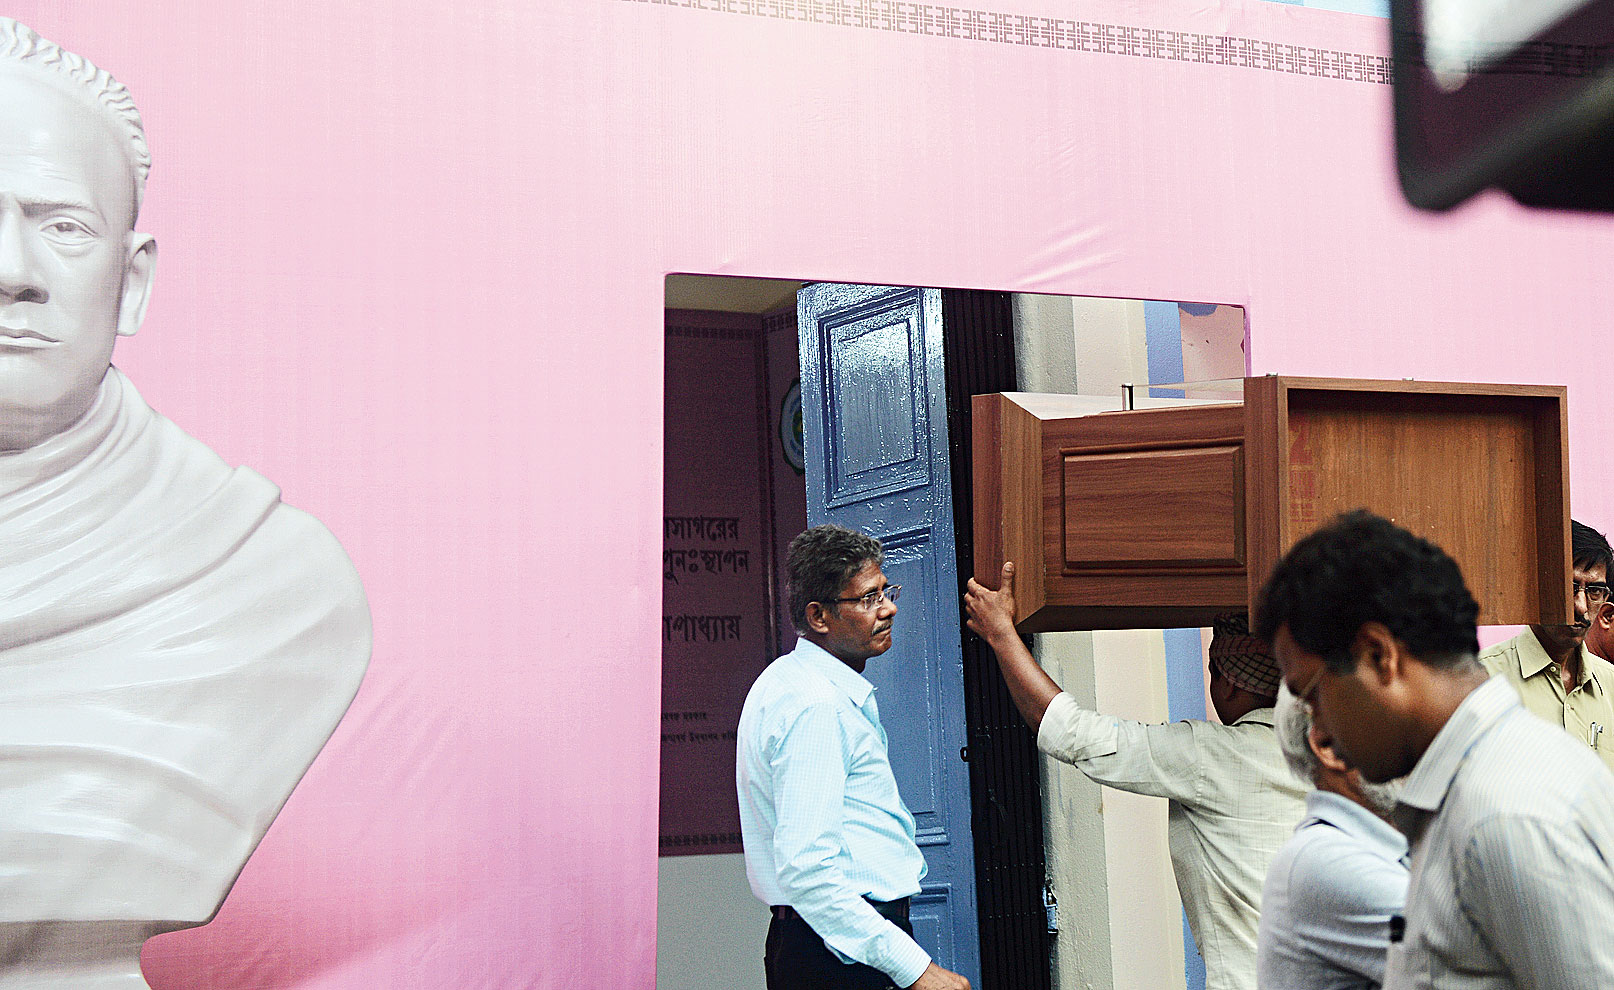 A wooden pedestal, on which Vidyasagar’s bust will be kept, being carried into a room on the ground floor of the college. The bust will be inside a glass enclosure. On May 14, intruders had smashed a similar glass enclosure before vandalising the earlier bust